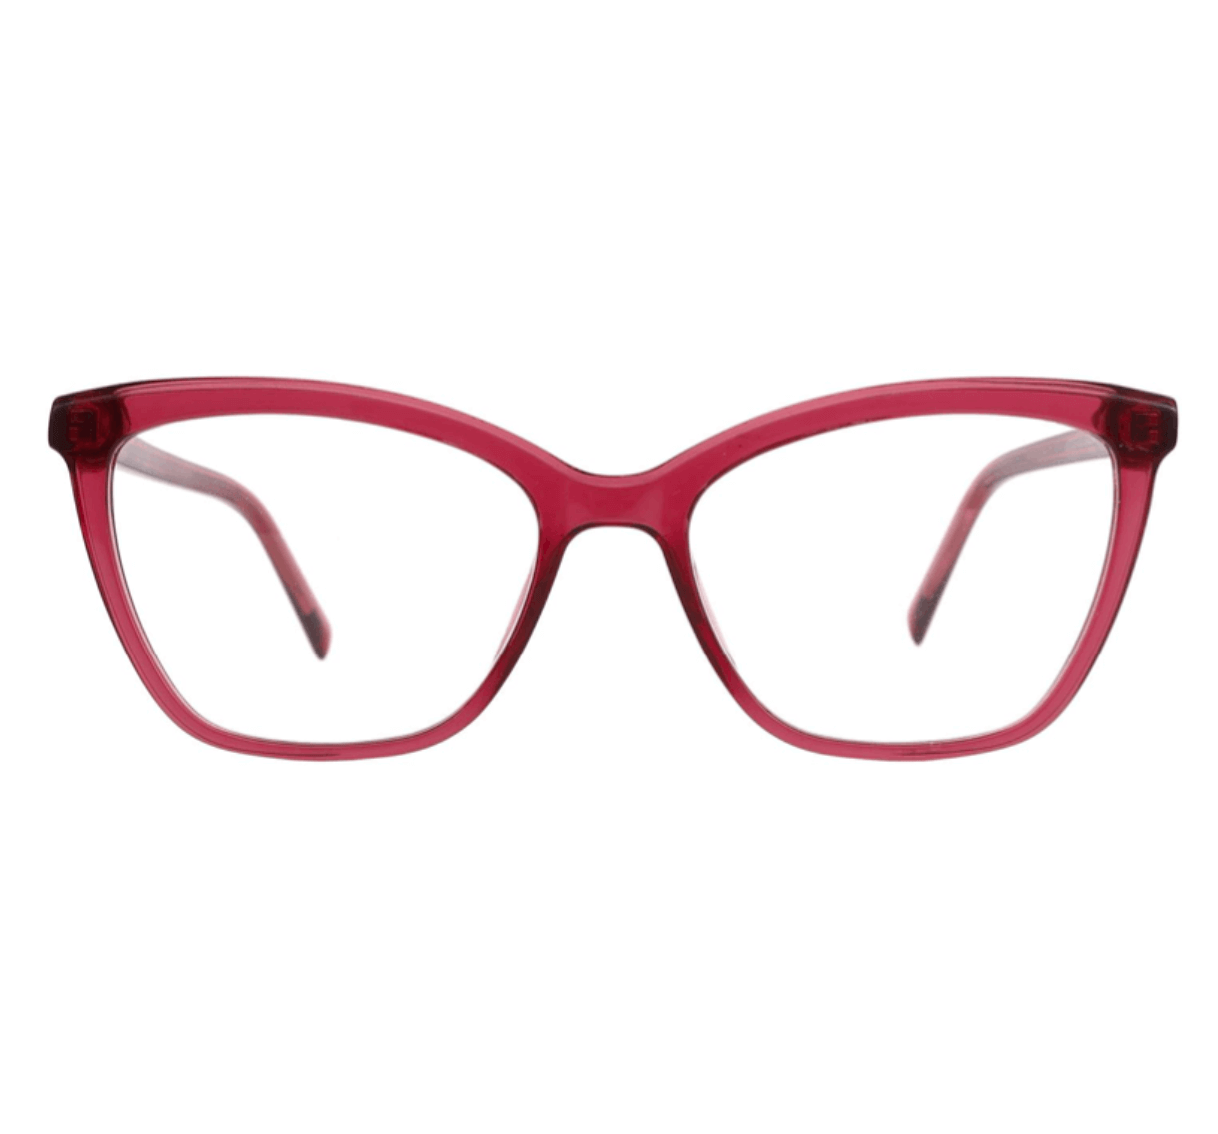 Ladies Spectacle Frames, customized glasses frames, optical frame suppliers, spectacle frame manufacturers